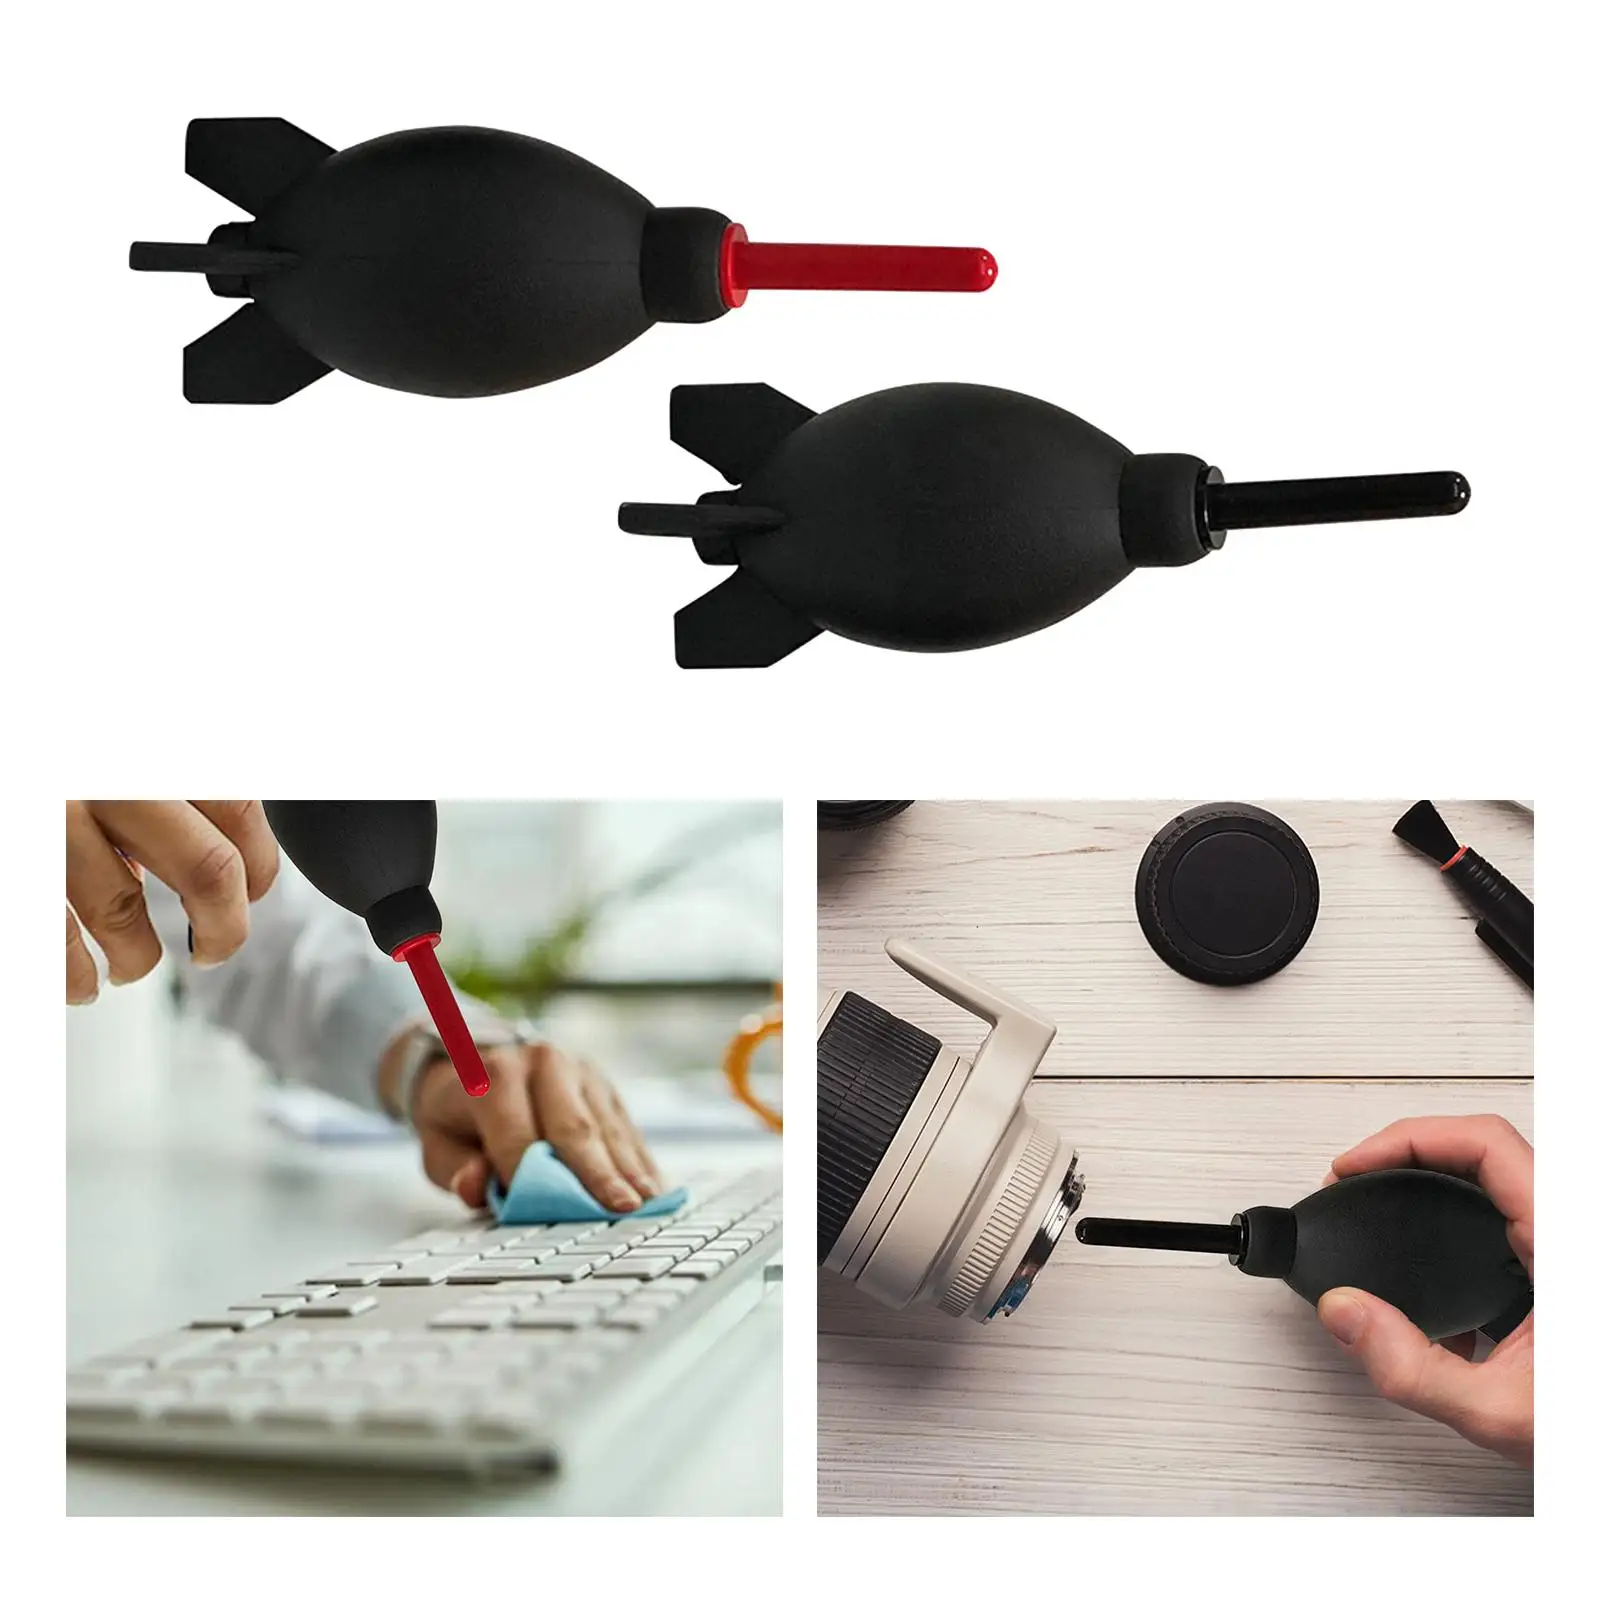 Rocket Blaster Air Duster Dust Cleaning Accessory Tool Rubber Durable Rocket Shape Air Blower for Camera Lens Computer